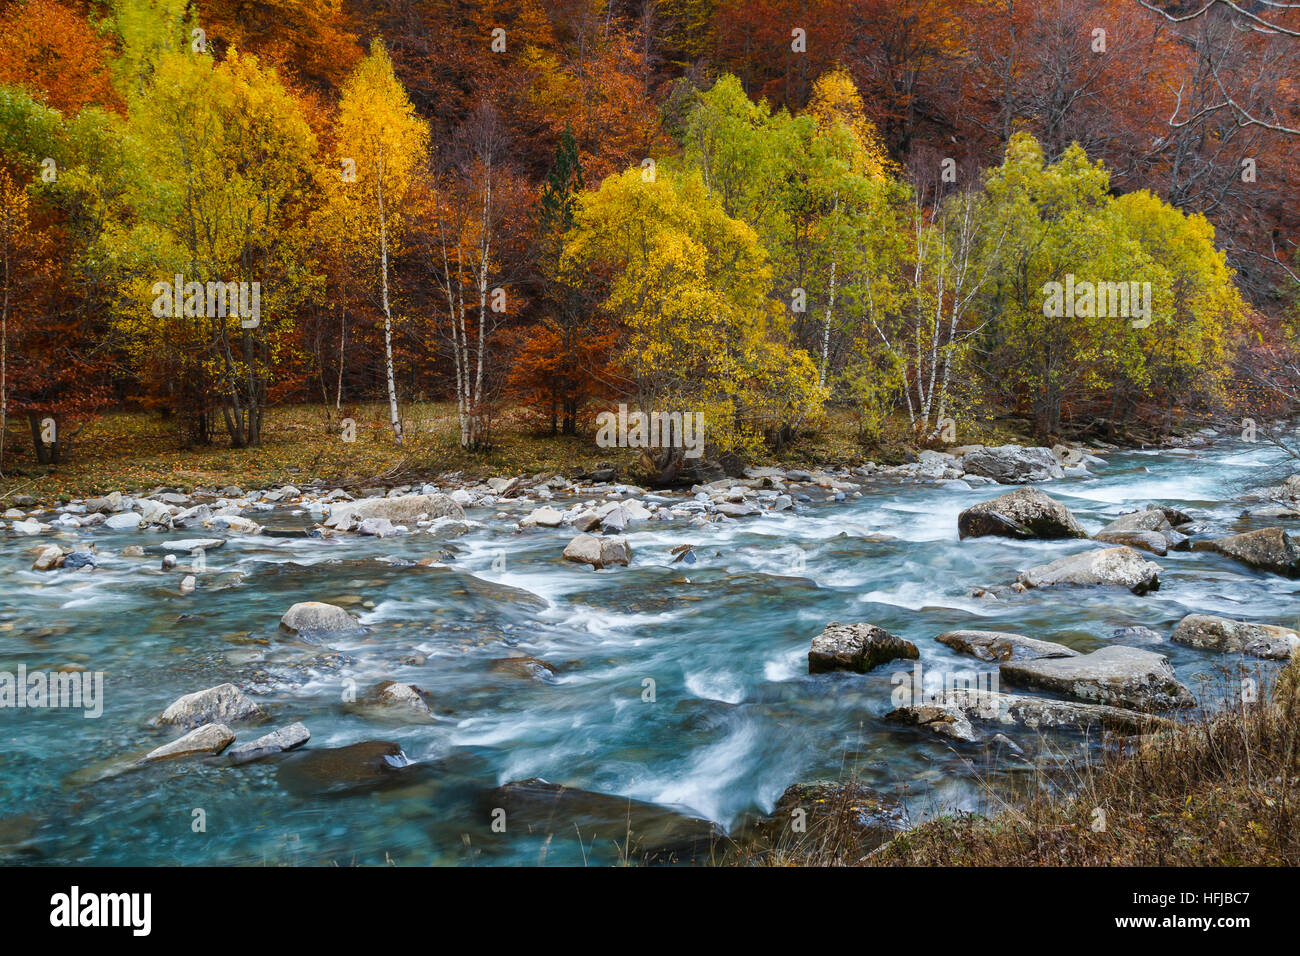 River and deciduous forest in autumn. Stock Photo